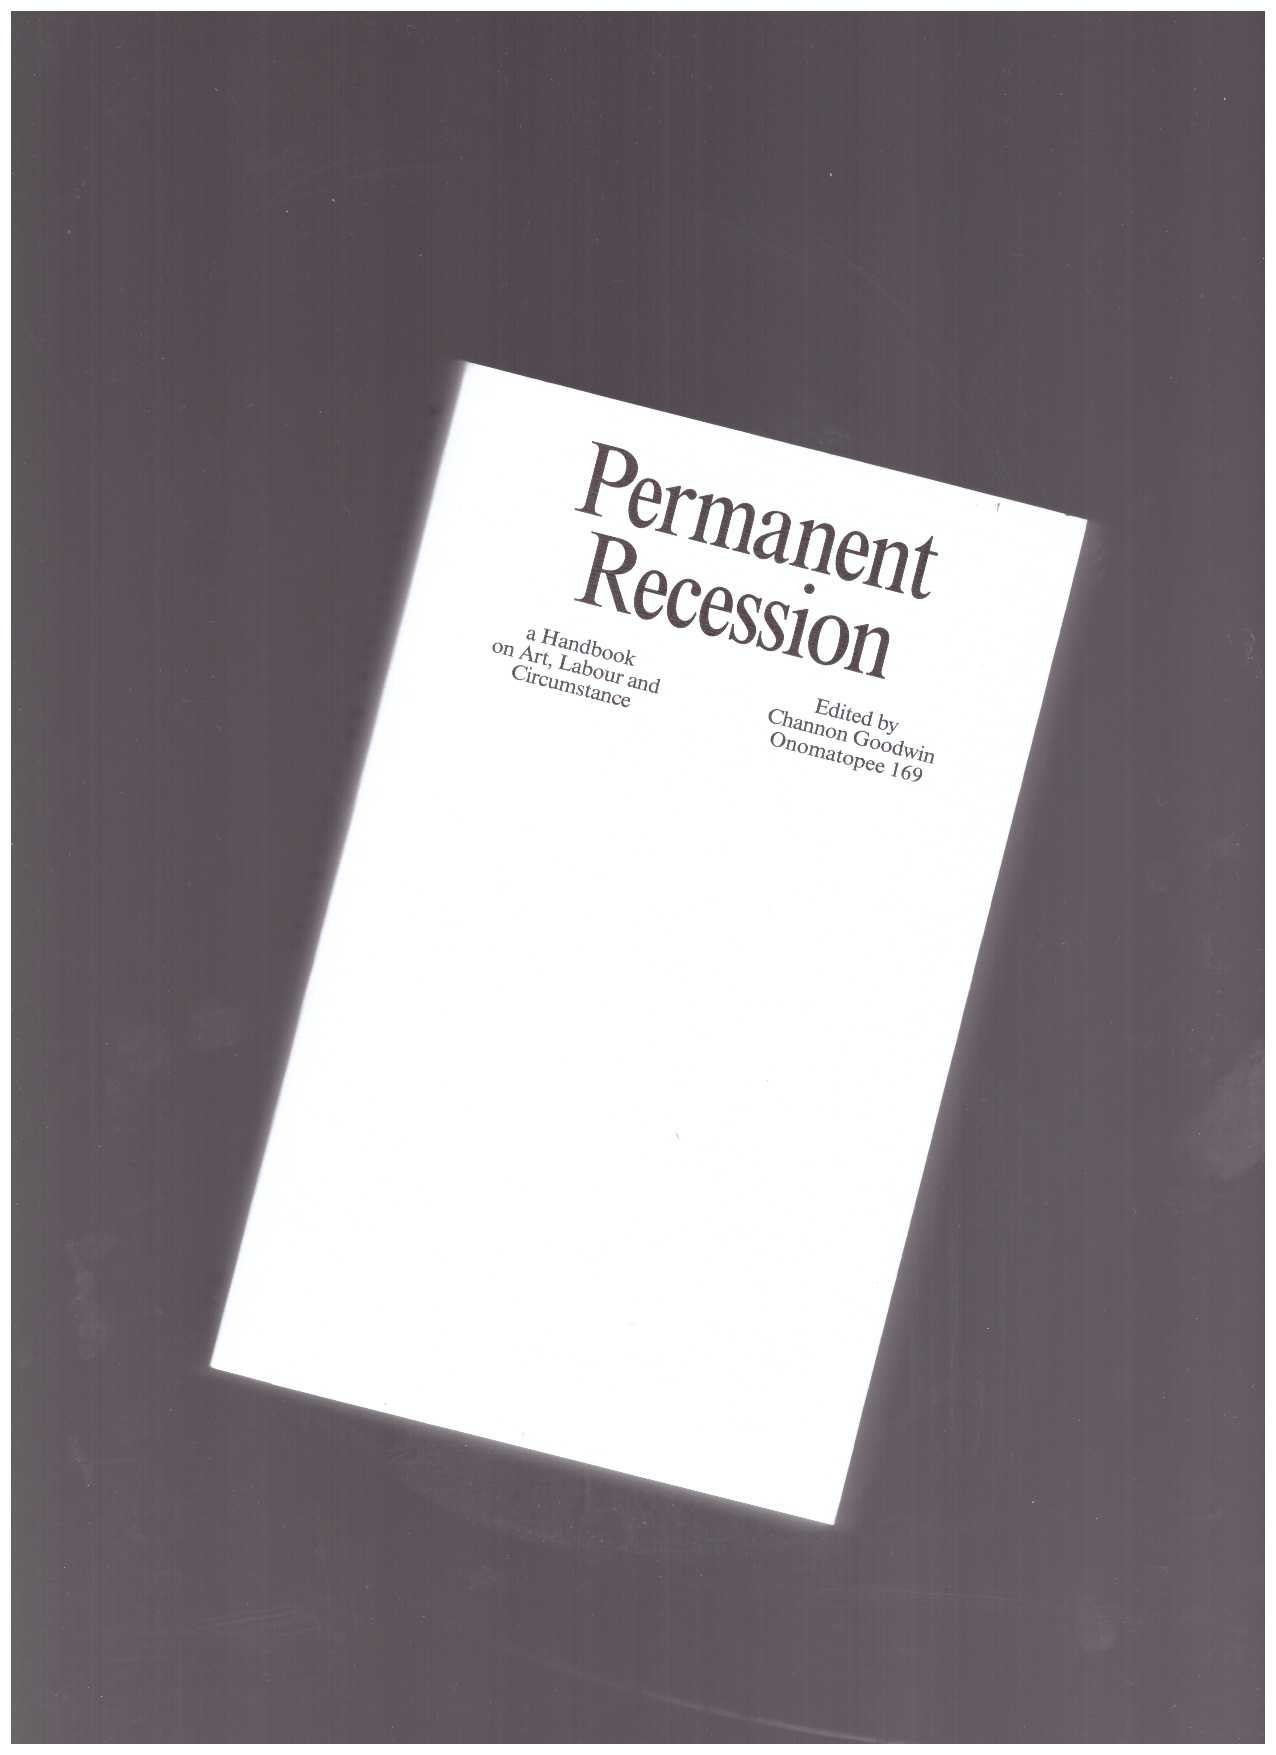 GOODWIN, Channon (ed.) - Permanent Recession: a Handbook on Art, Labour and Circumstance